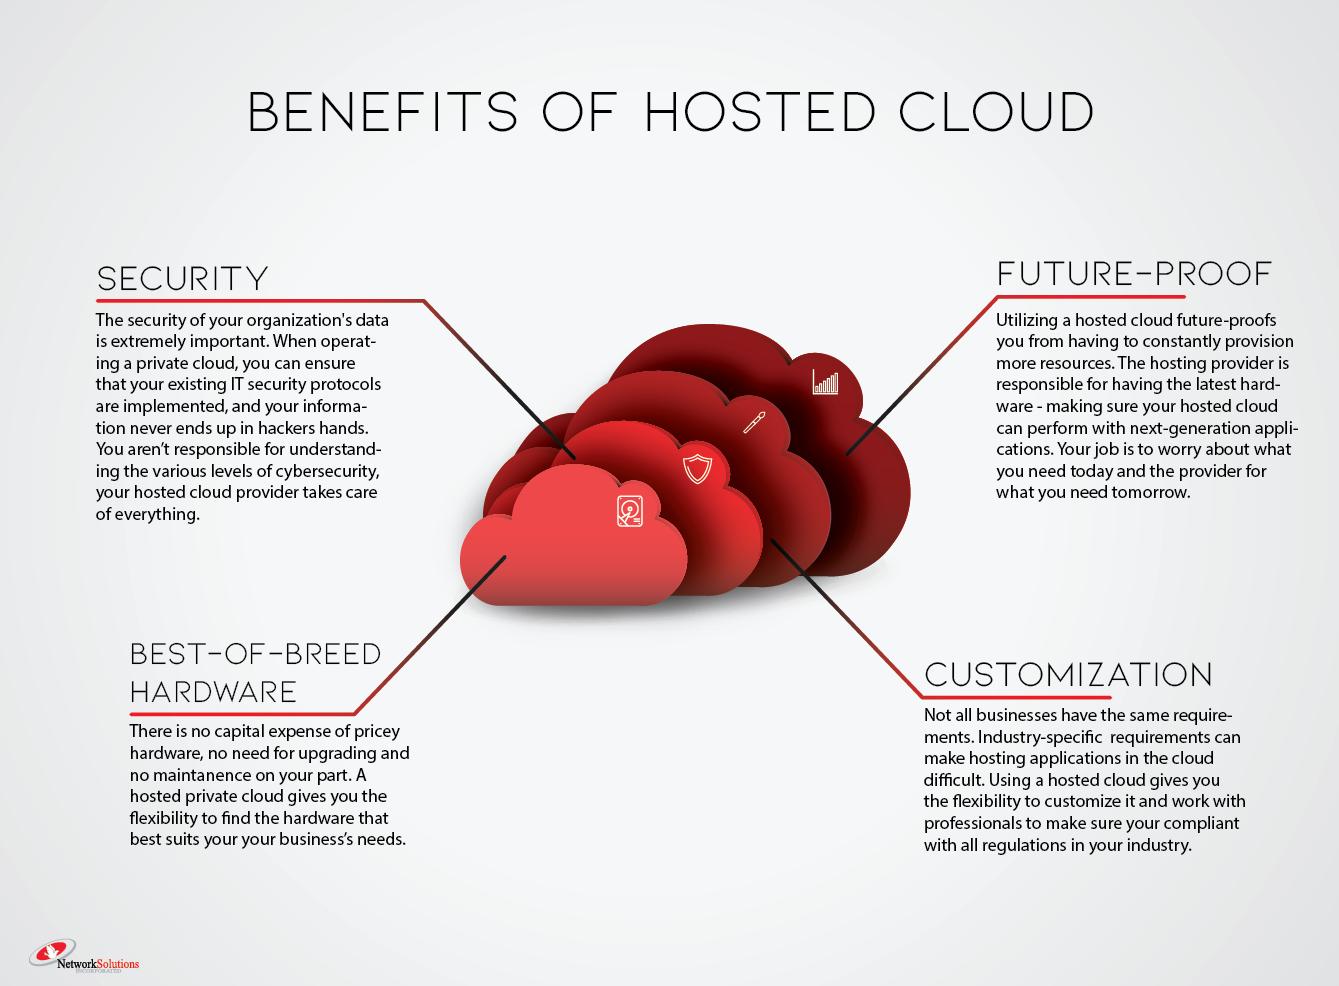 Benefits-of-Hosted-Cloud-Small-2